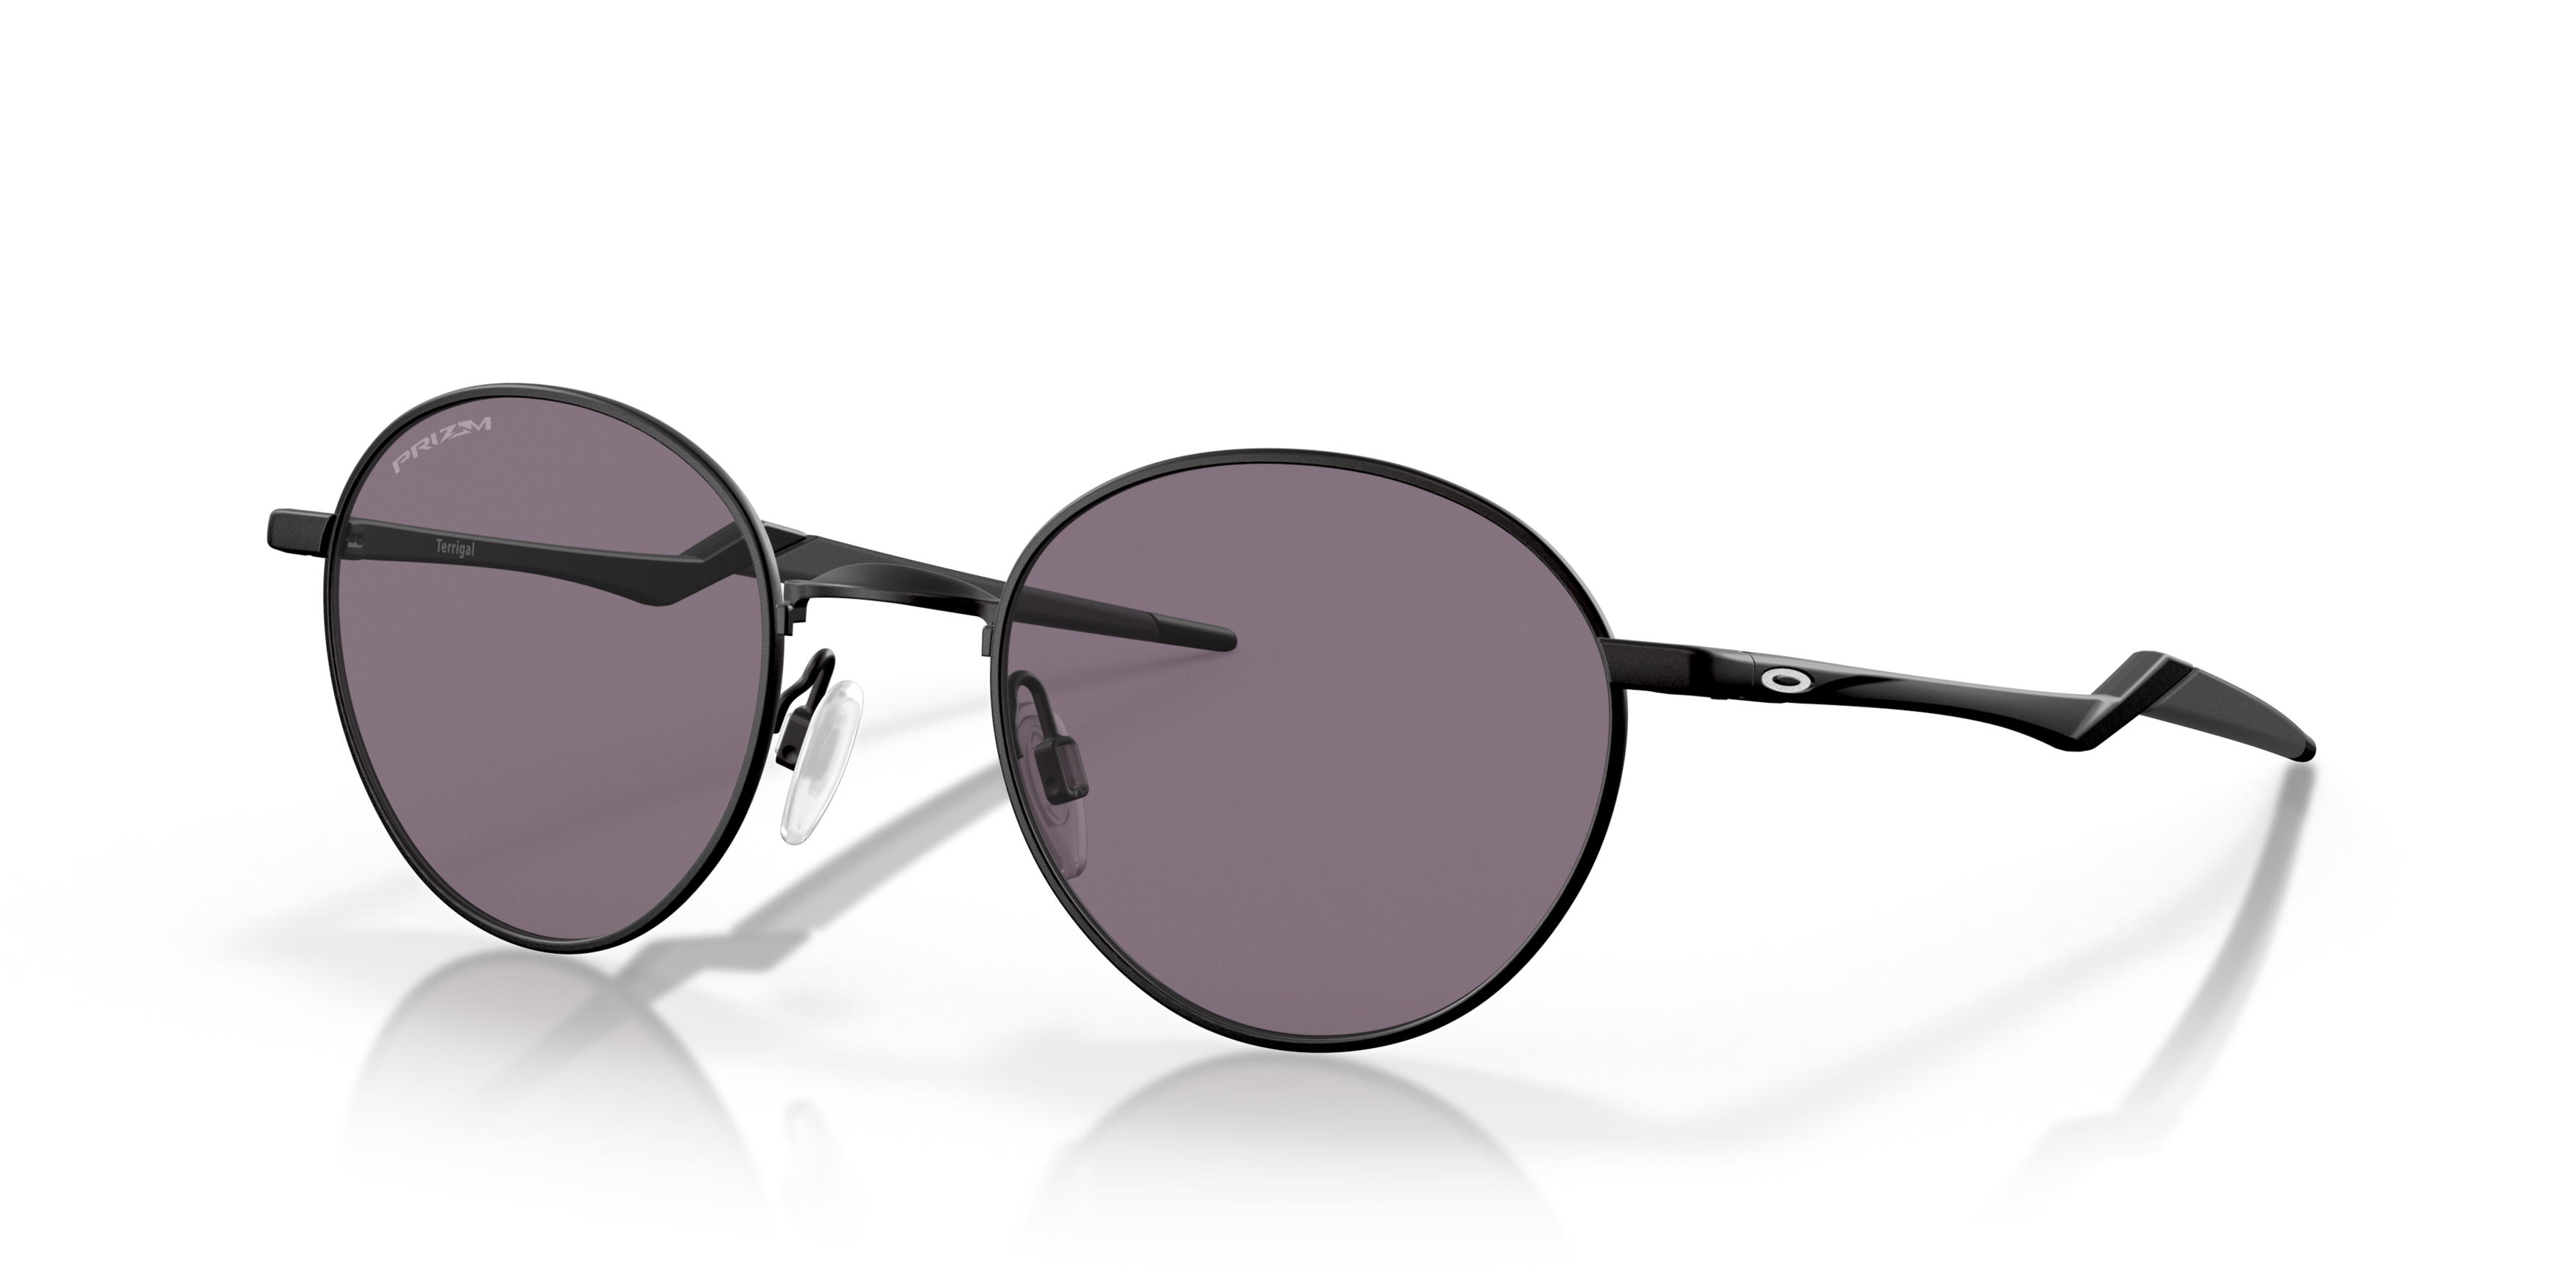 [products.image.angle_left01] OAKLEY OO4146 414601